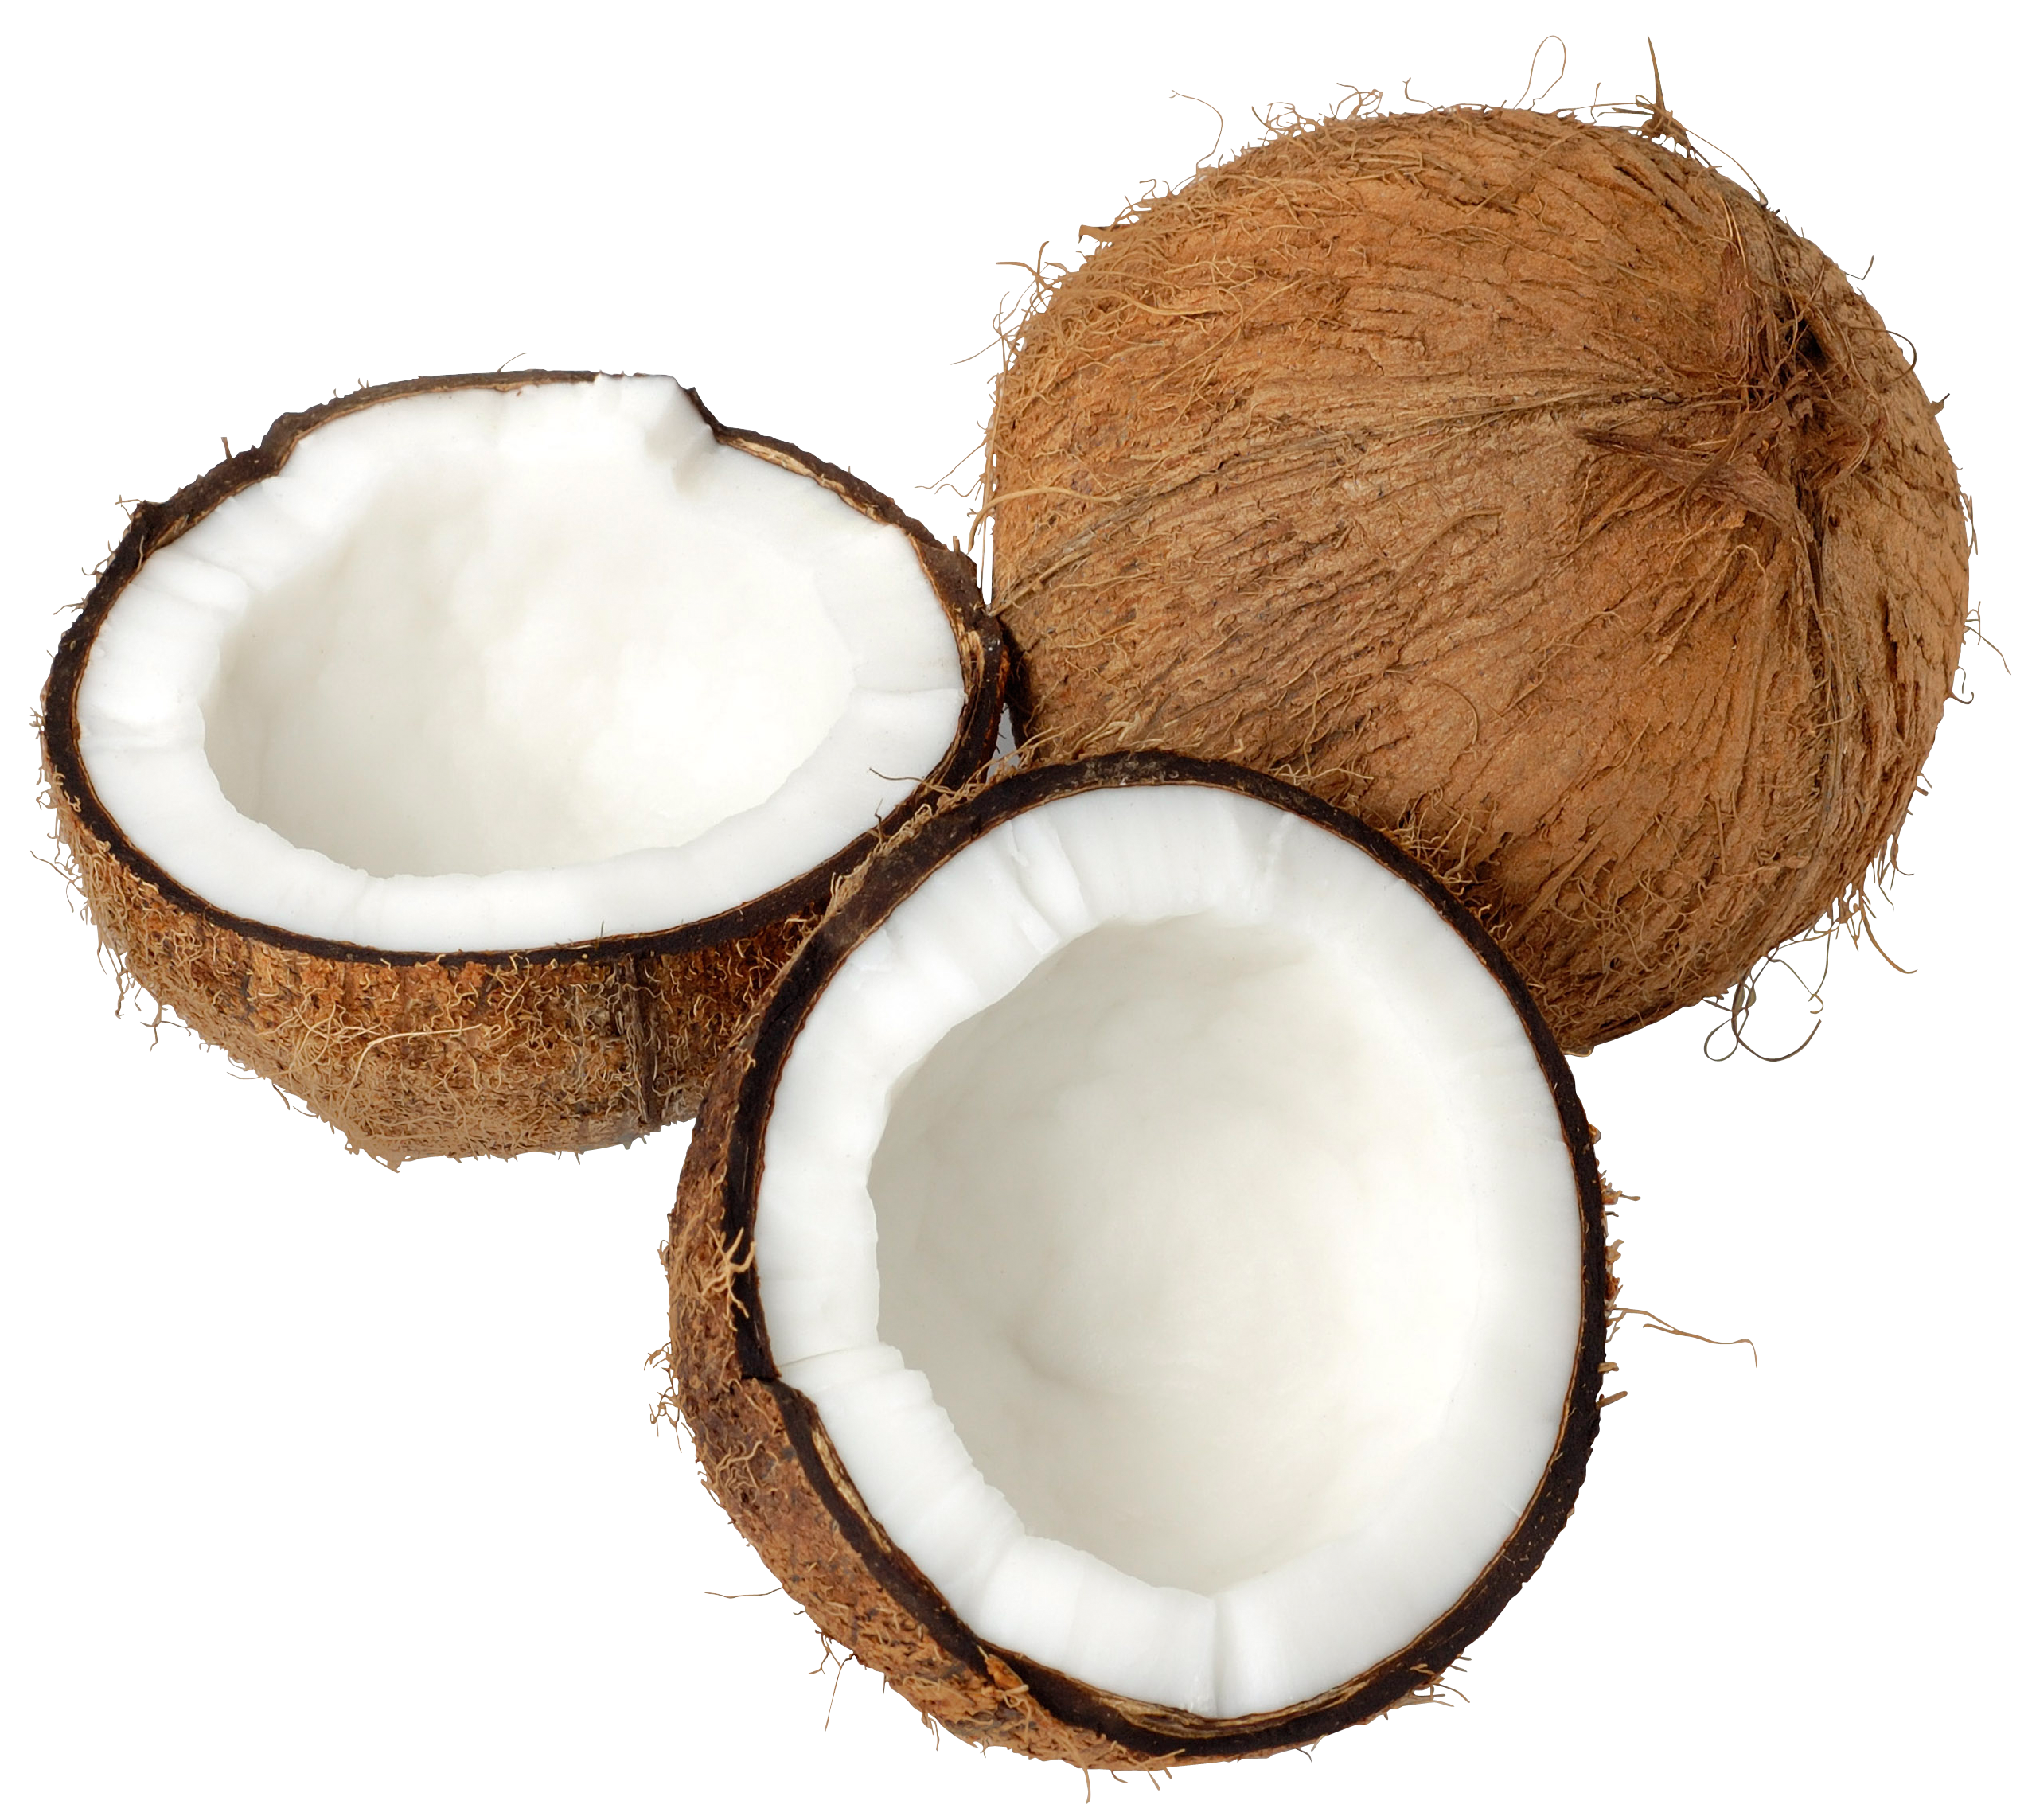 Coconut Png File PNG Image